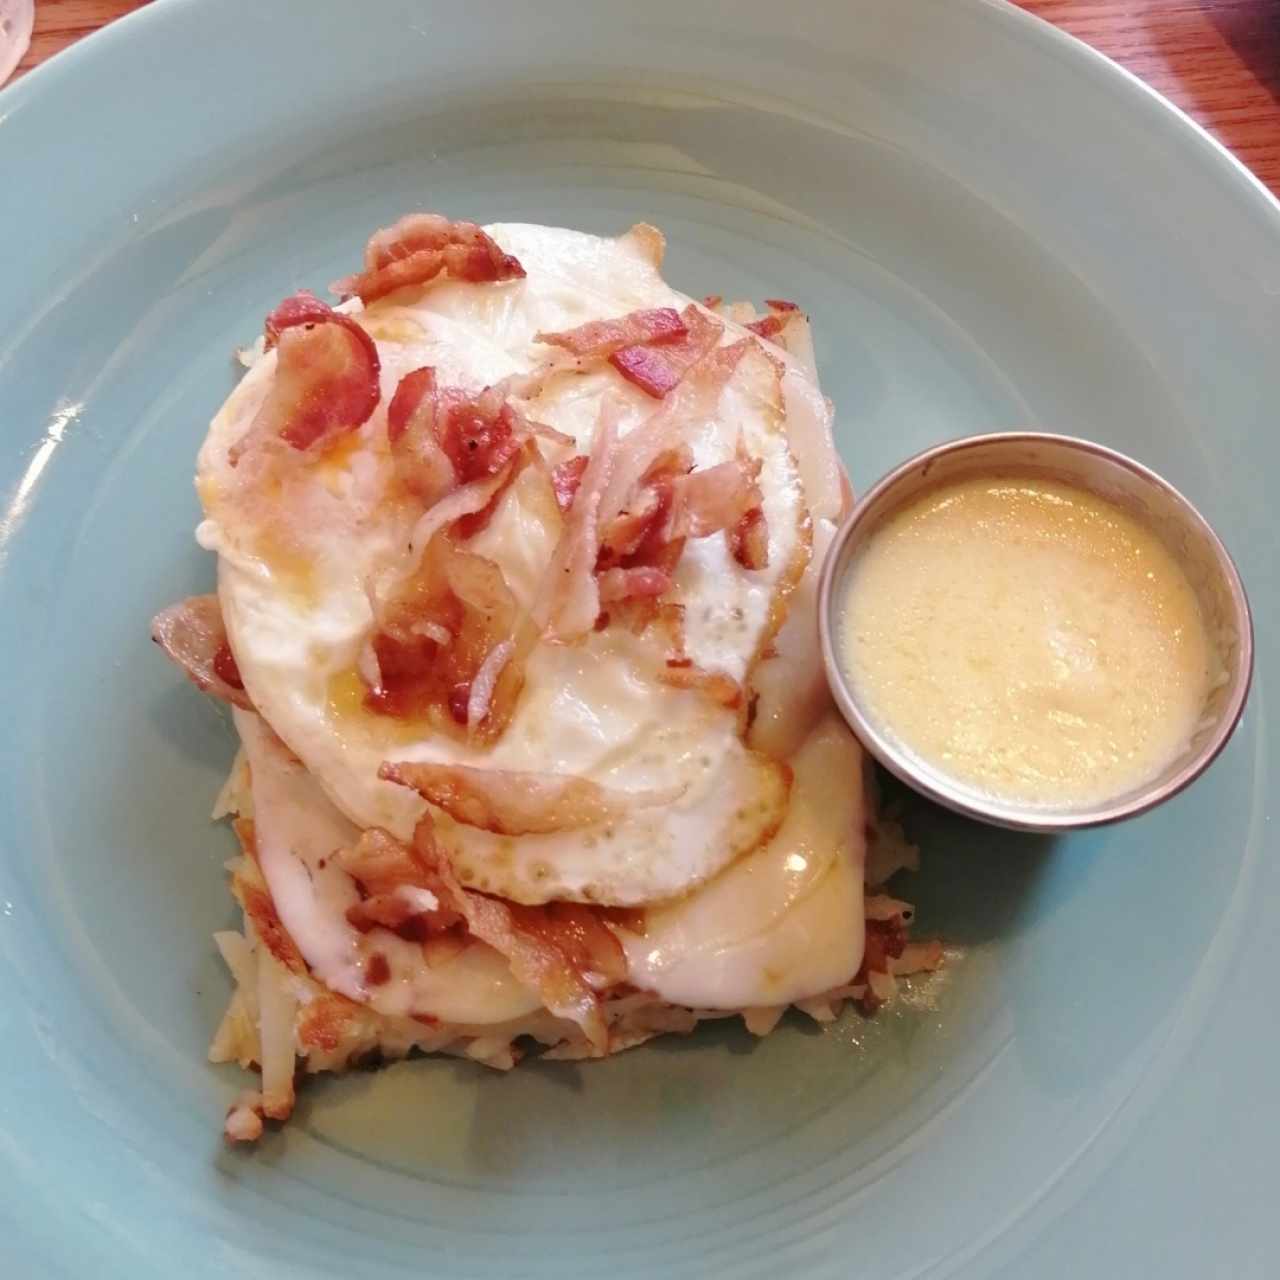 Hashbrown's Cheese and Bacon